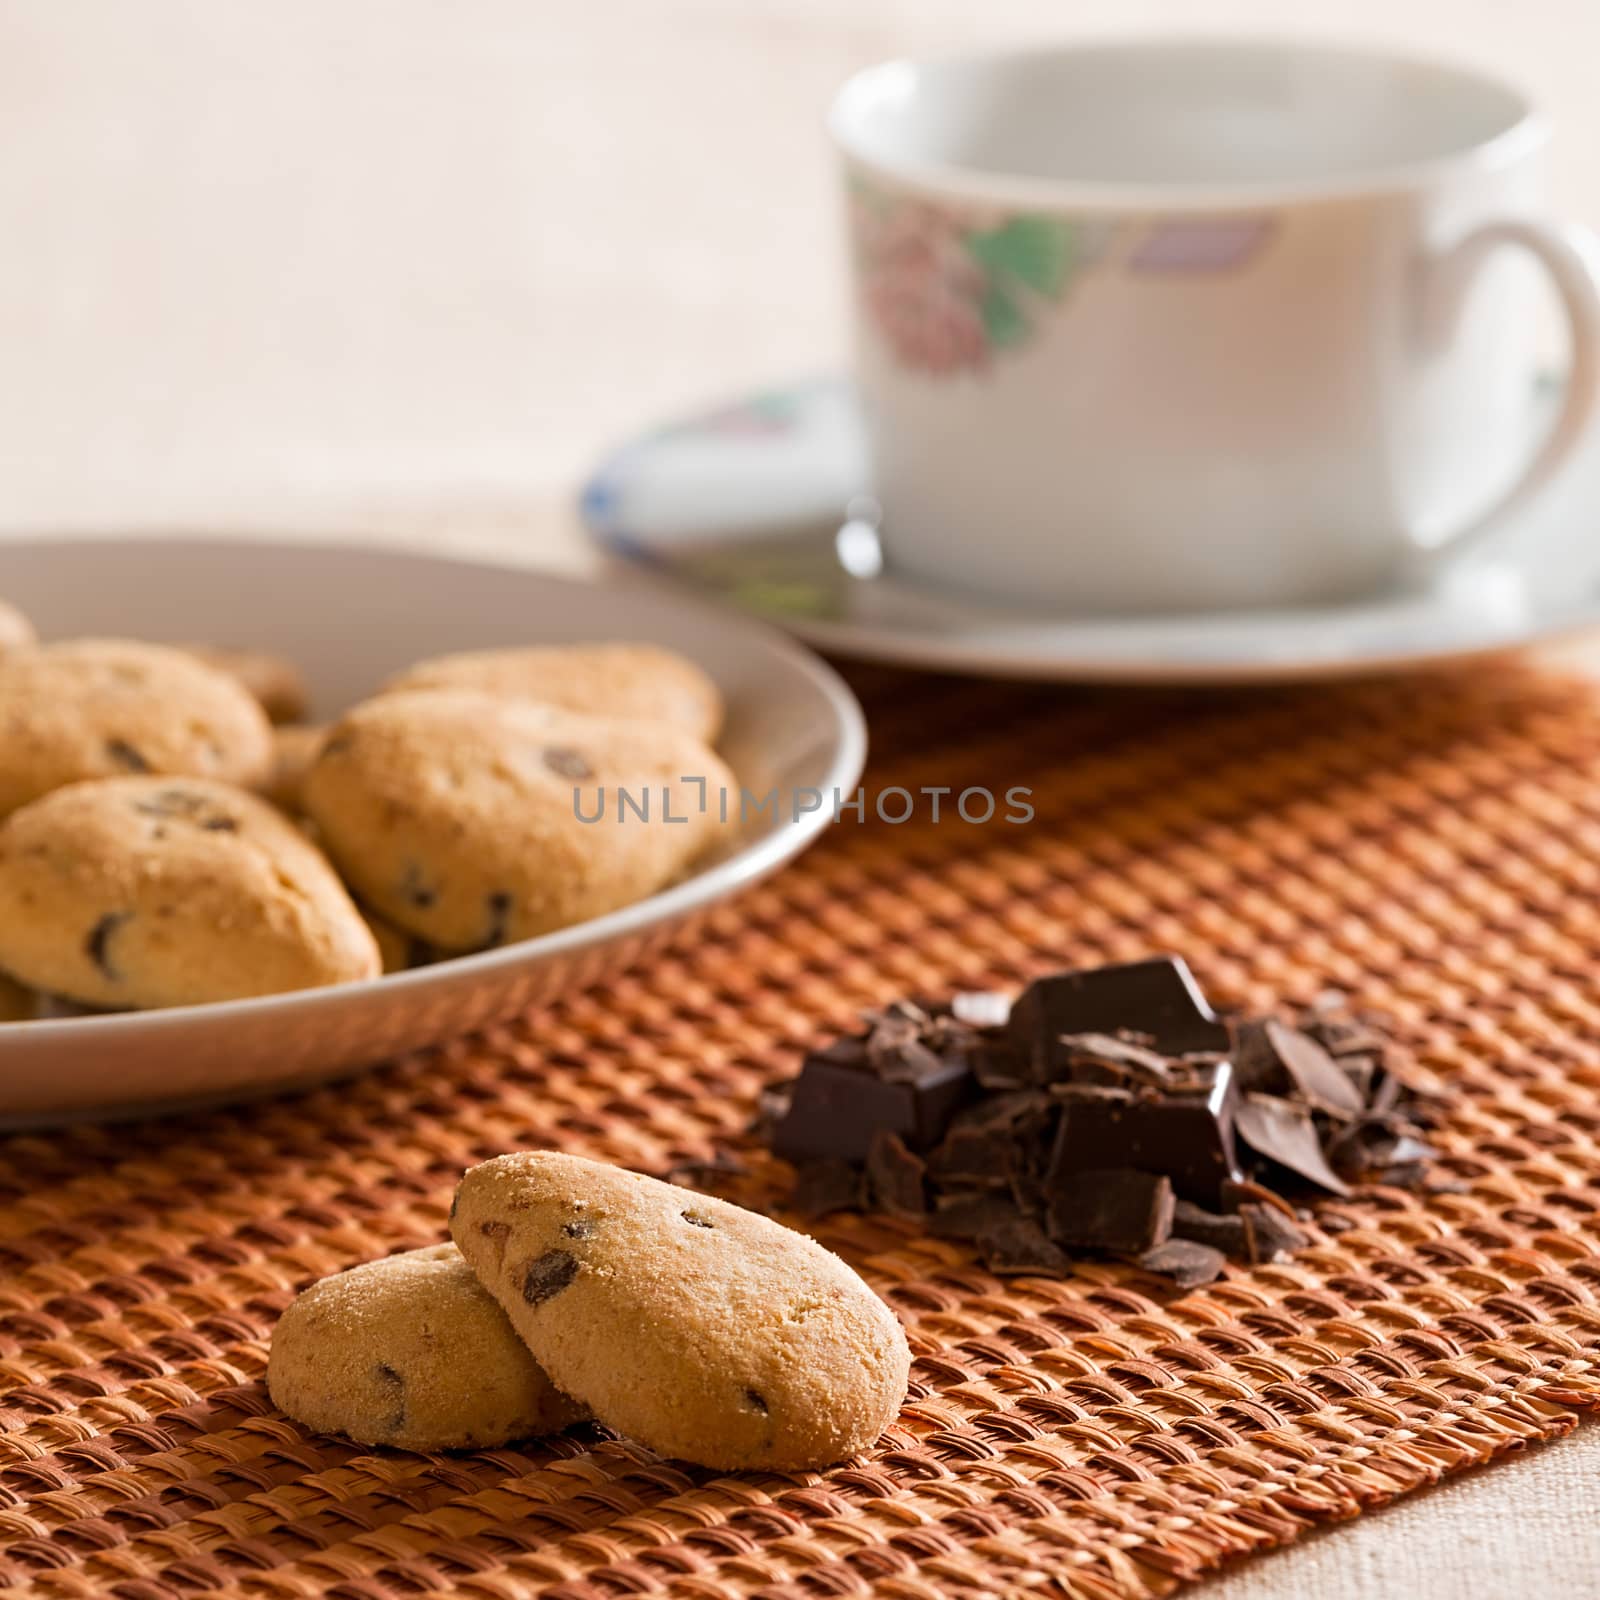 Cookies with chocolate chips and chocolate flakes by LuigiMorbidelli